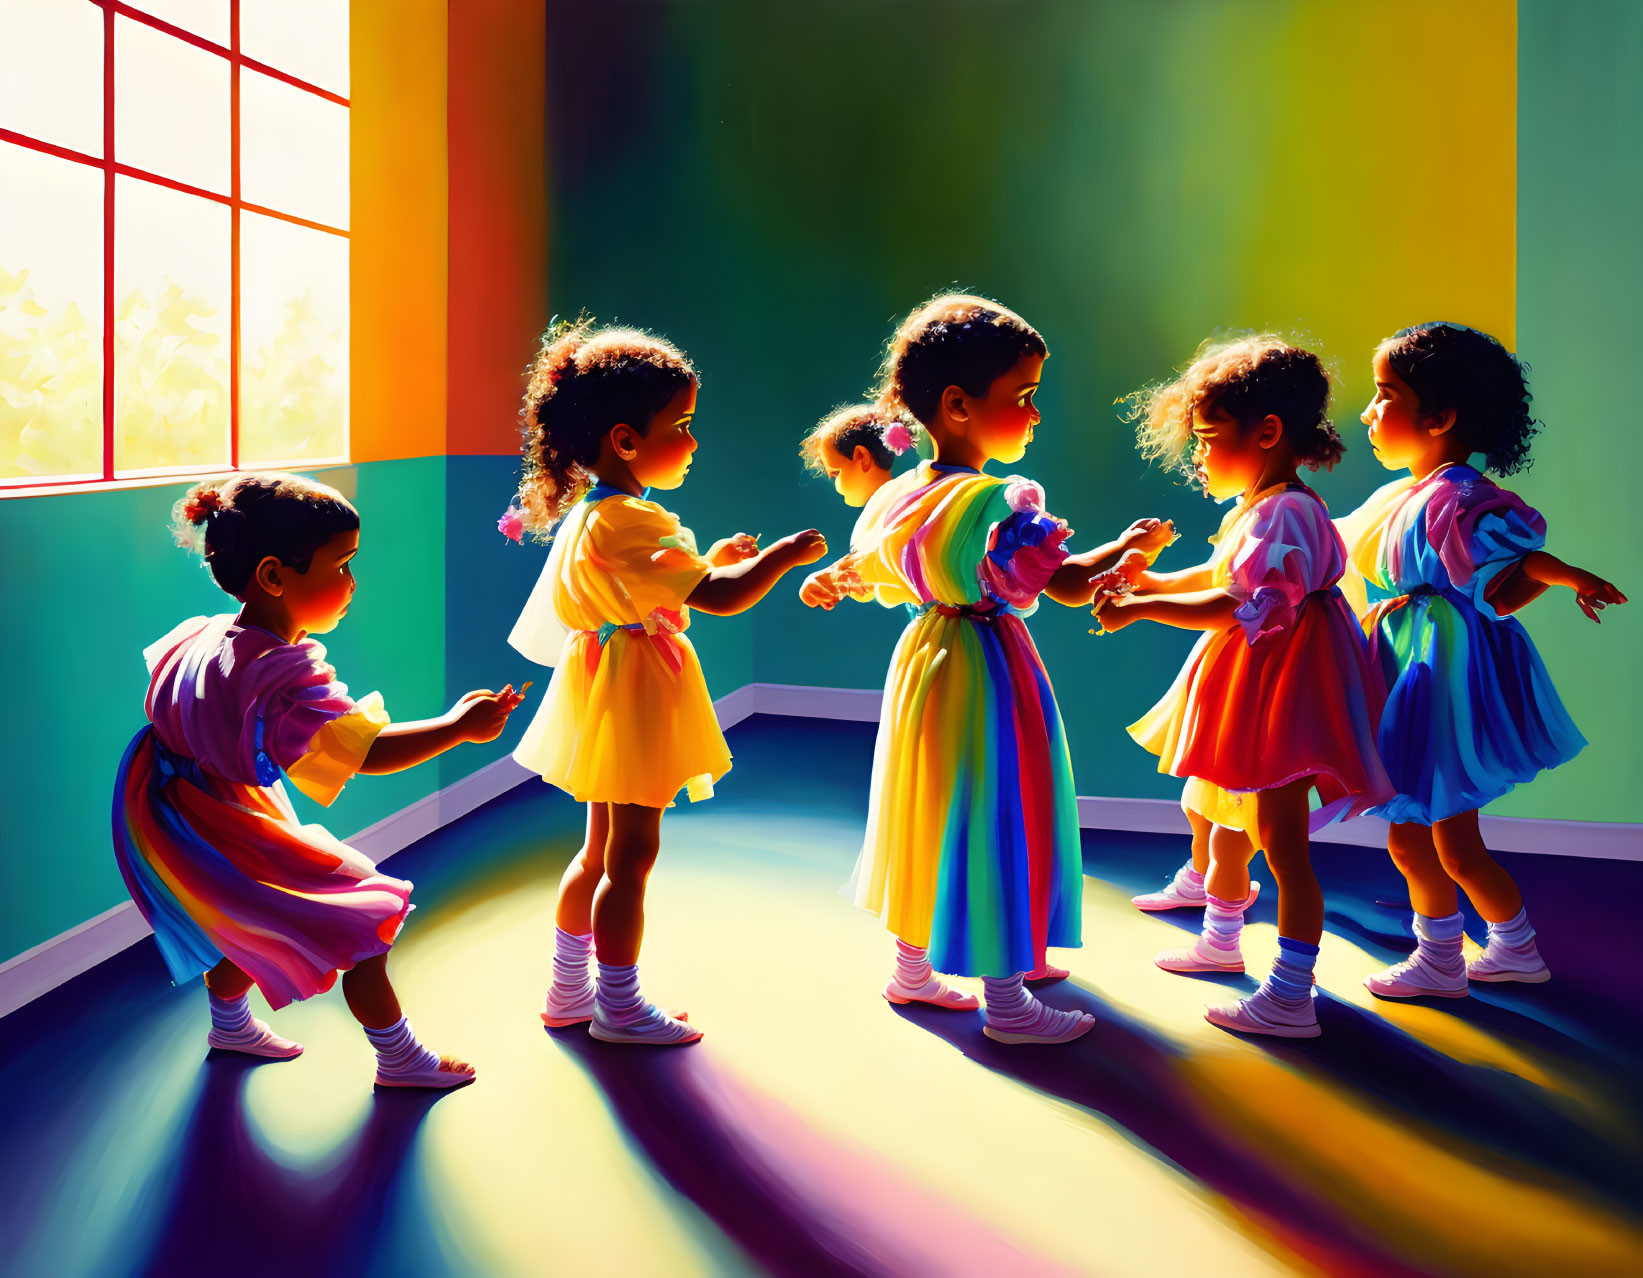 Vibrant illustration of six girls playing in sunlight-filled room